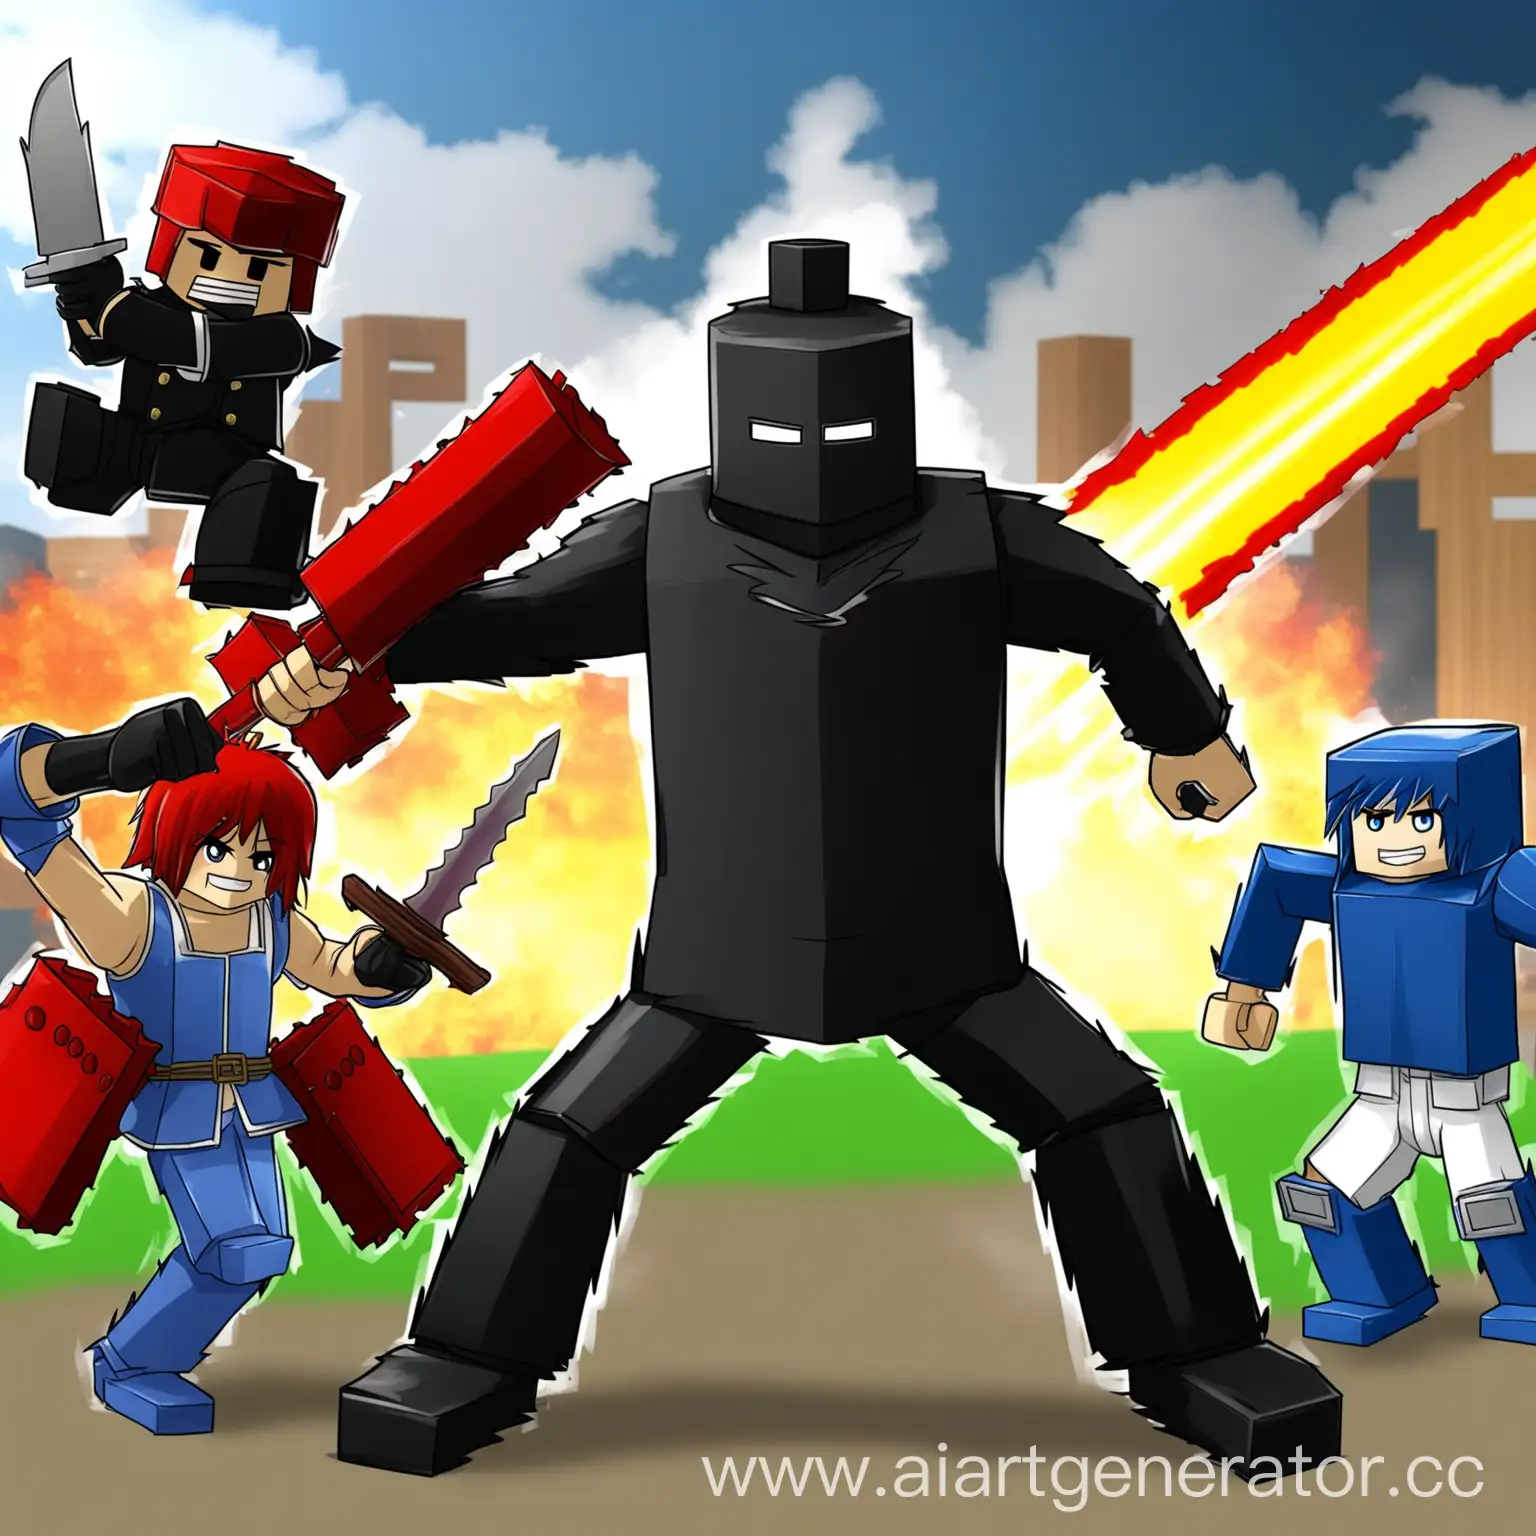 Epic-Roblox-Anime-Battle-Dynamic-Action-and-Intriguing-Characters